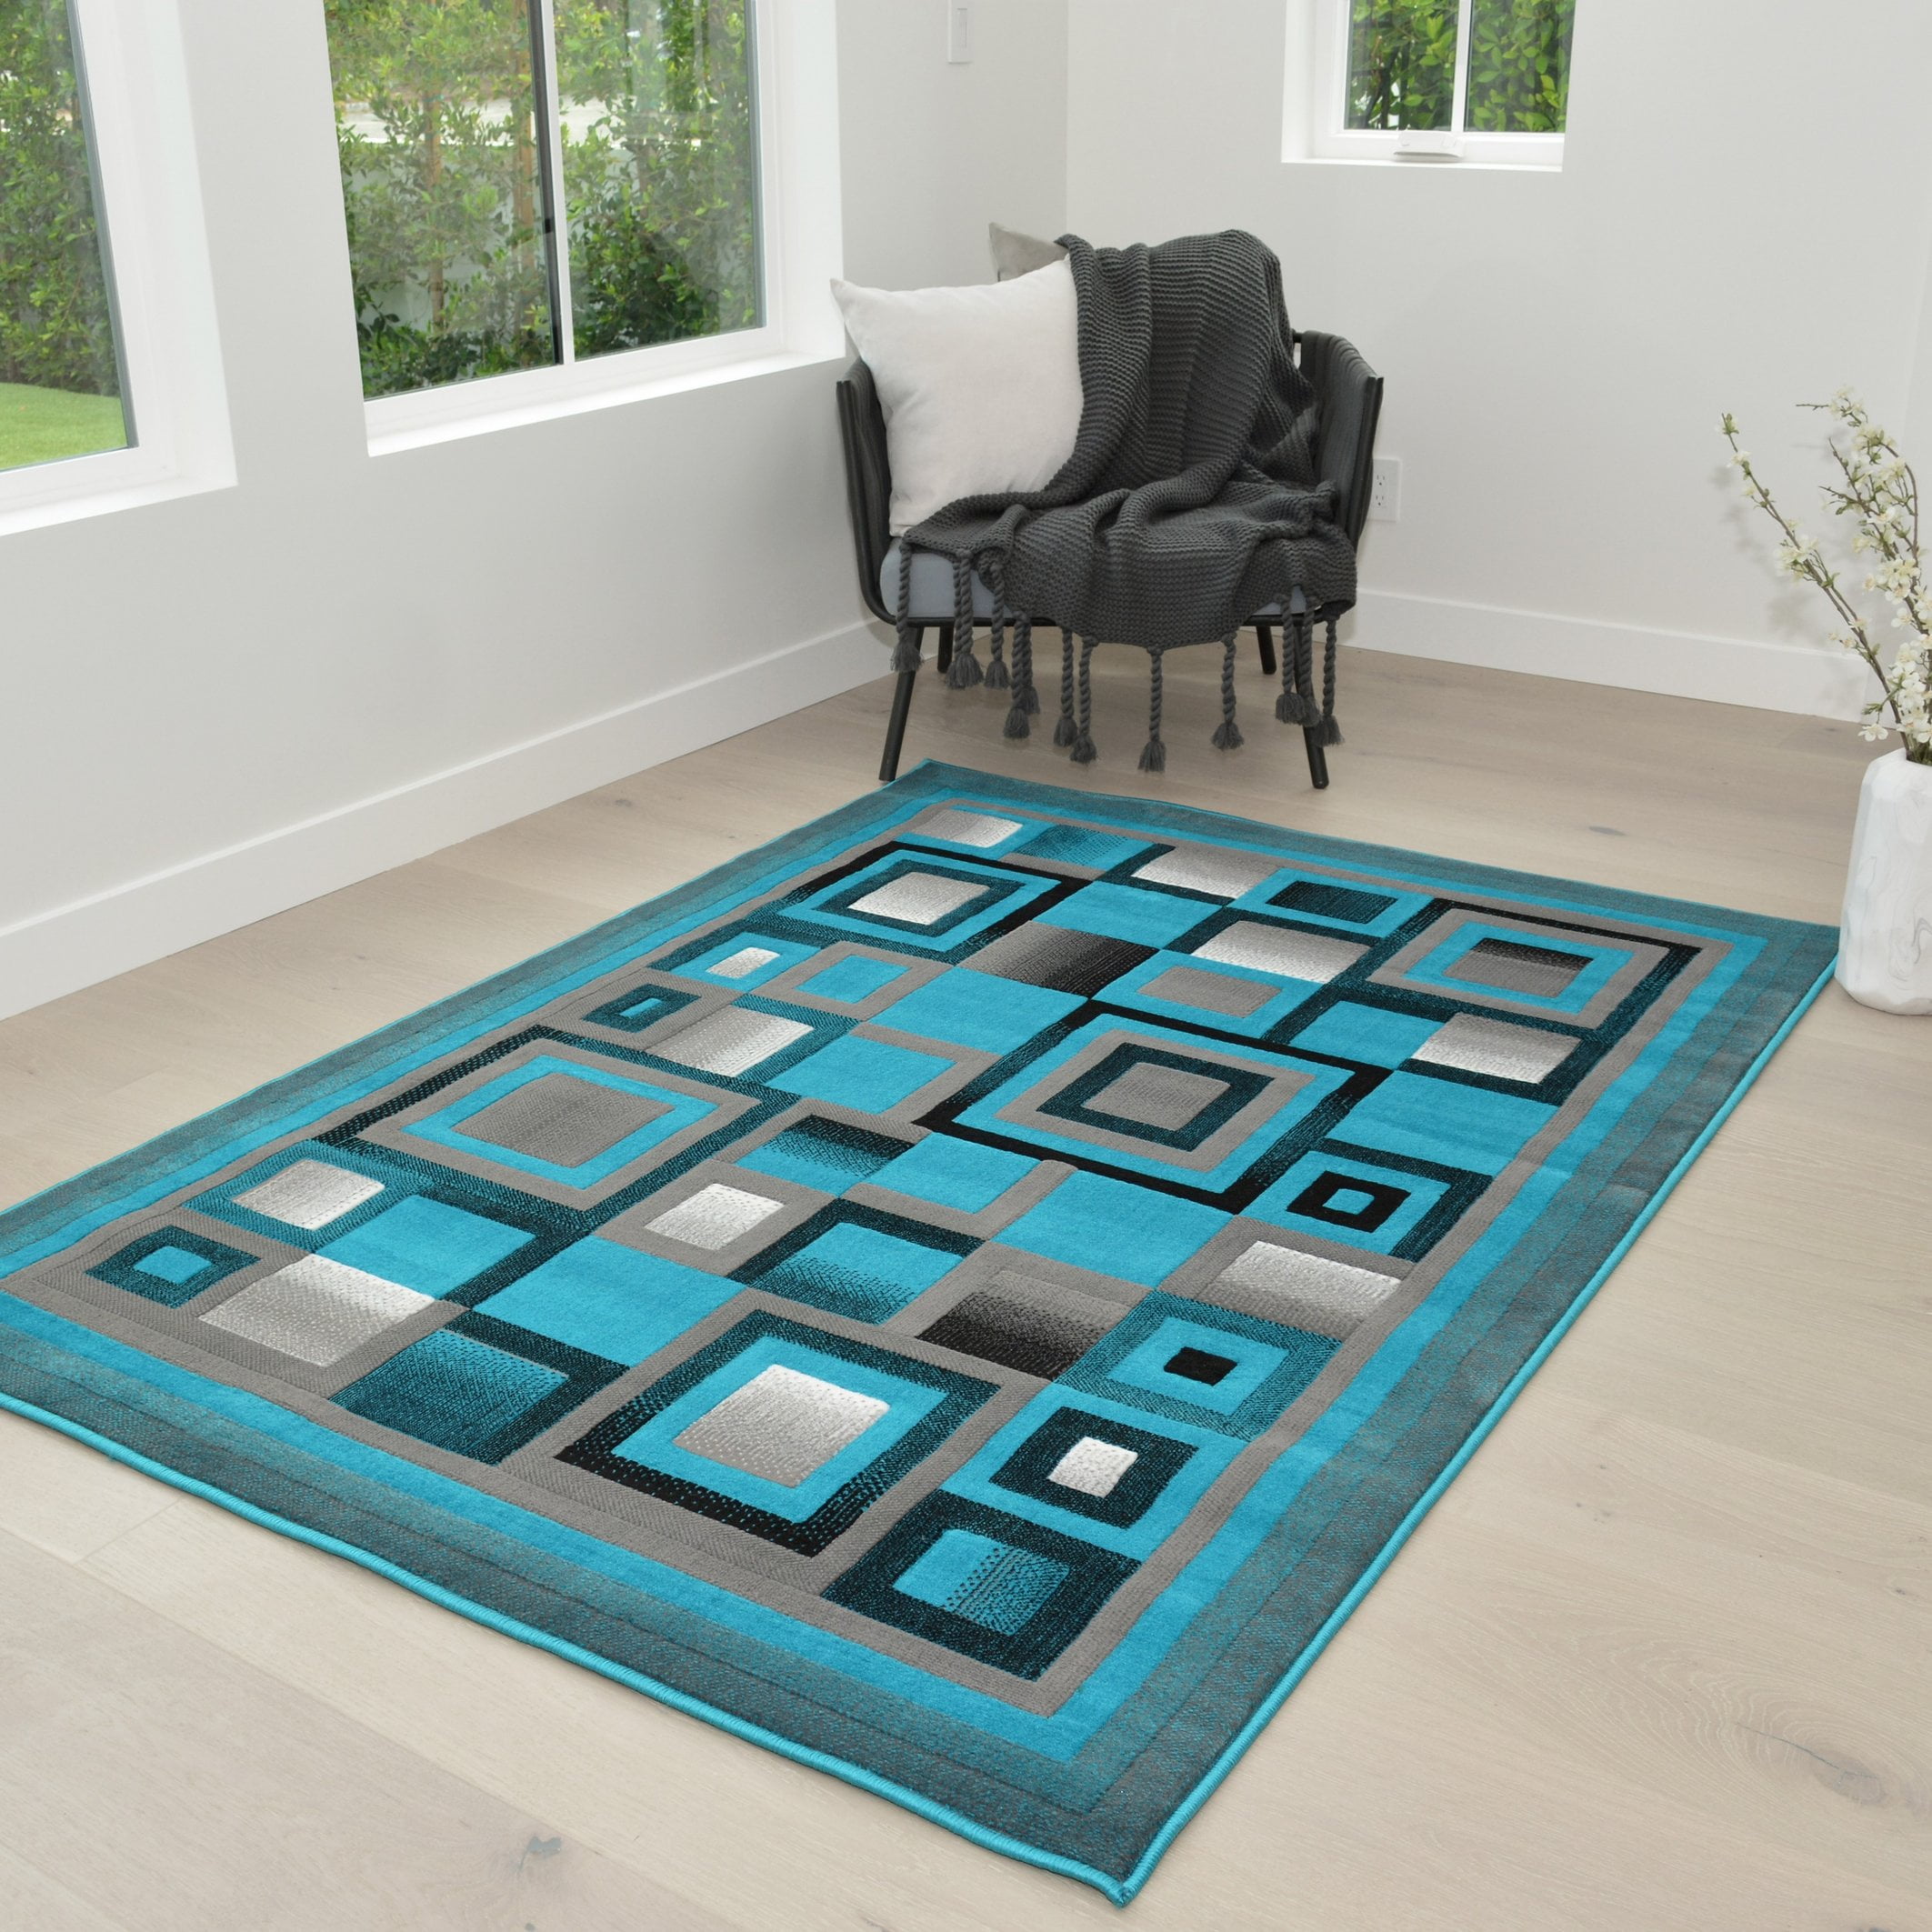 Hr Rugs Turquoise Gray And Black, Turquoise And Grey Rug